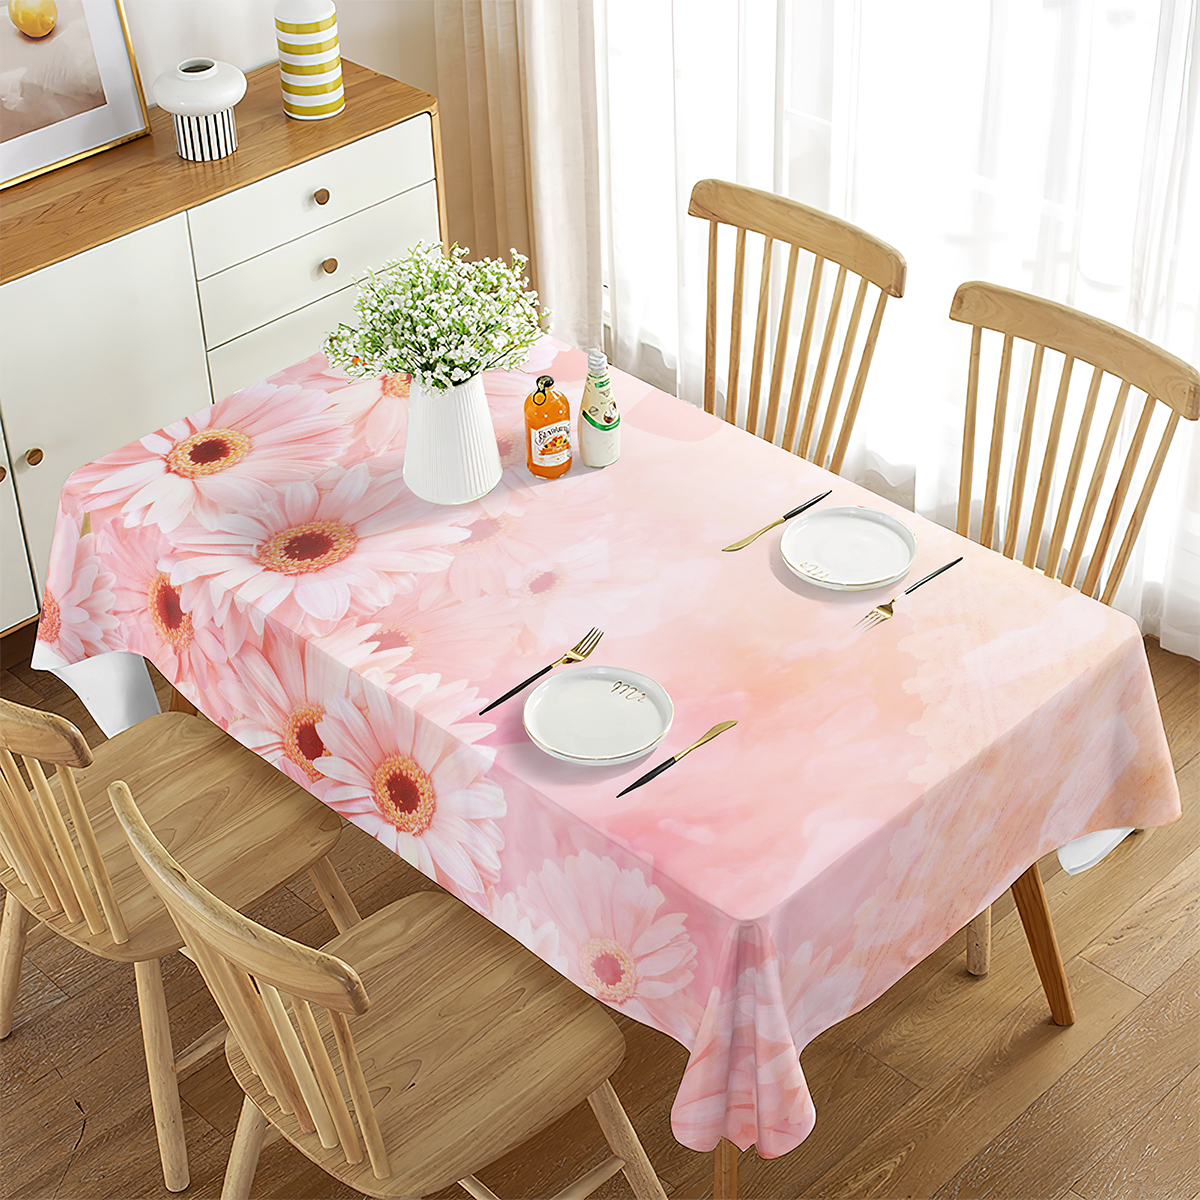 Floral Tablecloth Beautiful Flowers Rectangular Table Cover Dining Room Banquette Kitchen Outdoor Picnic Wedding Decoration